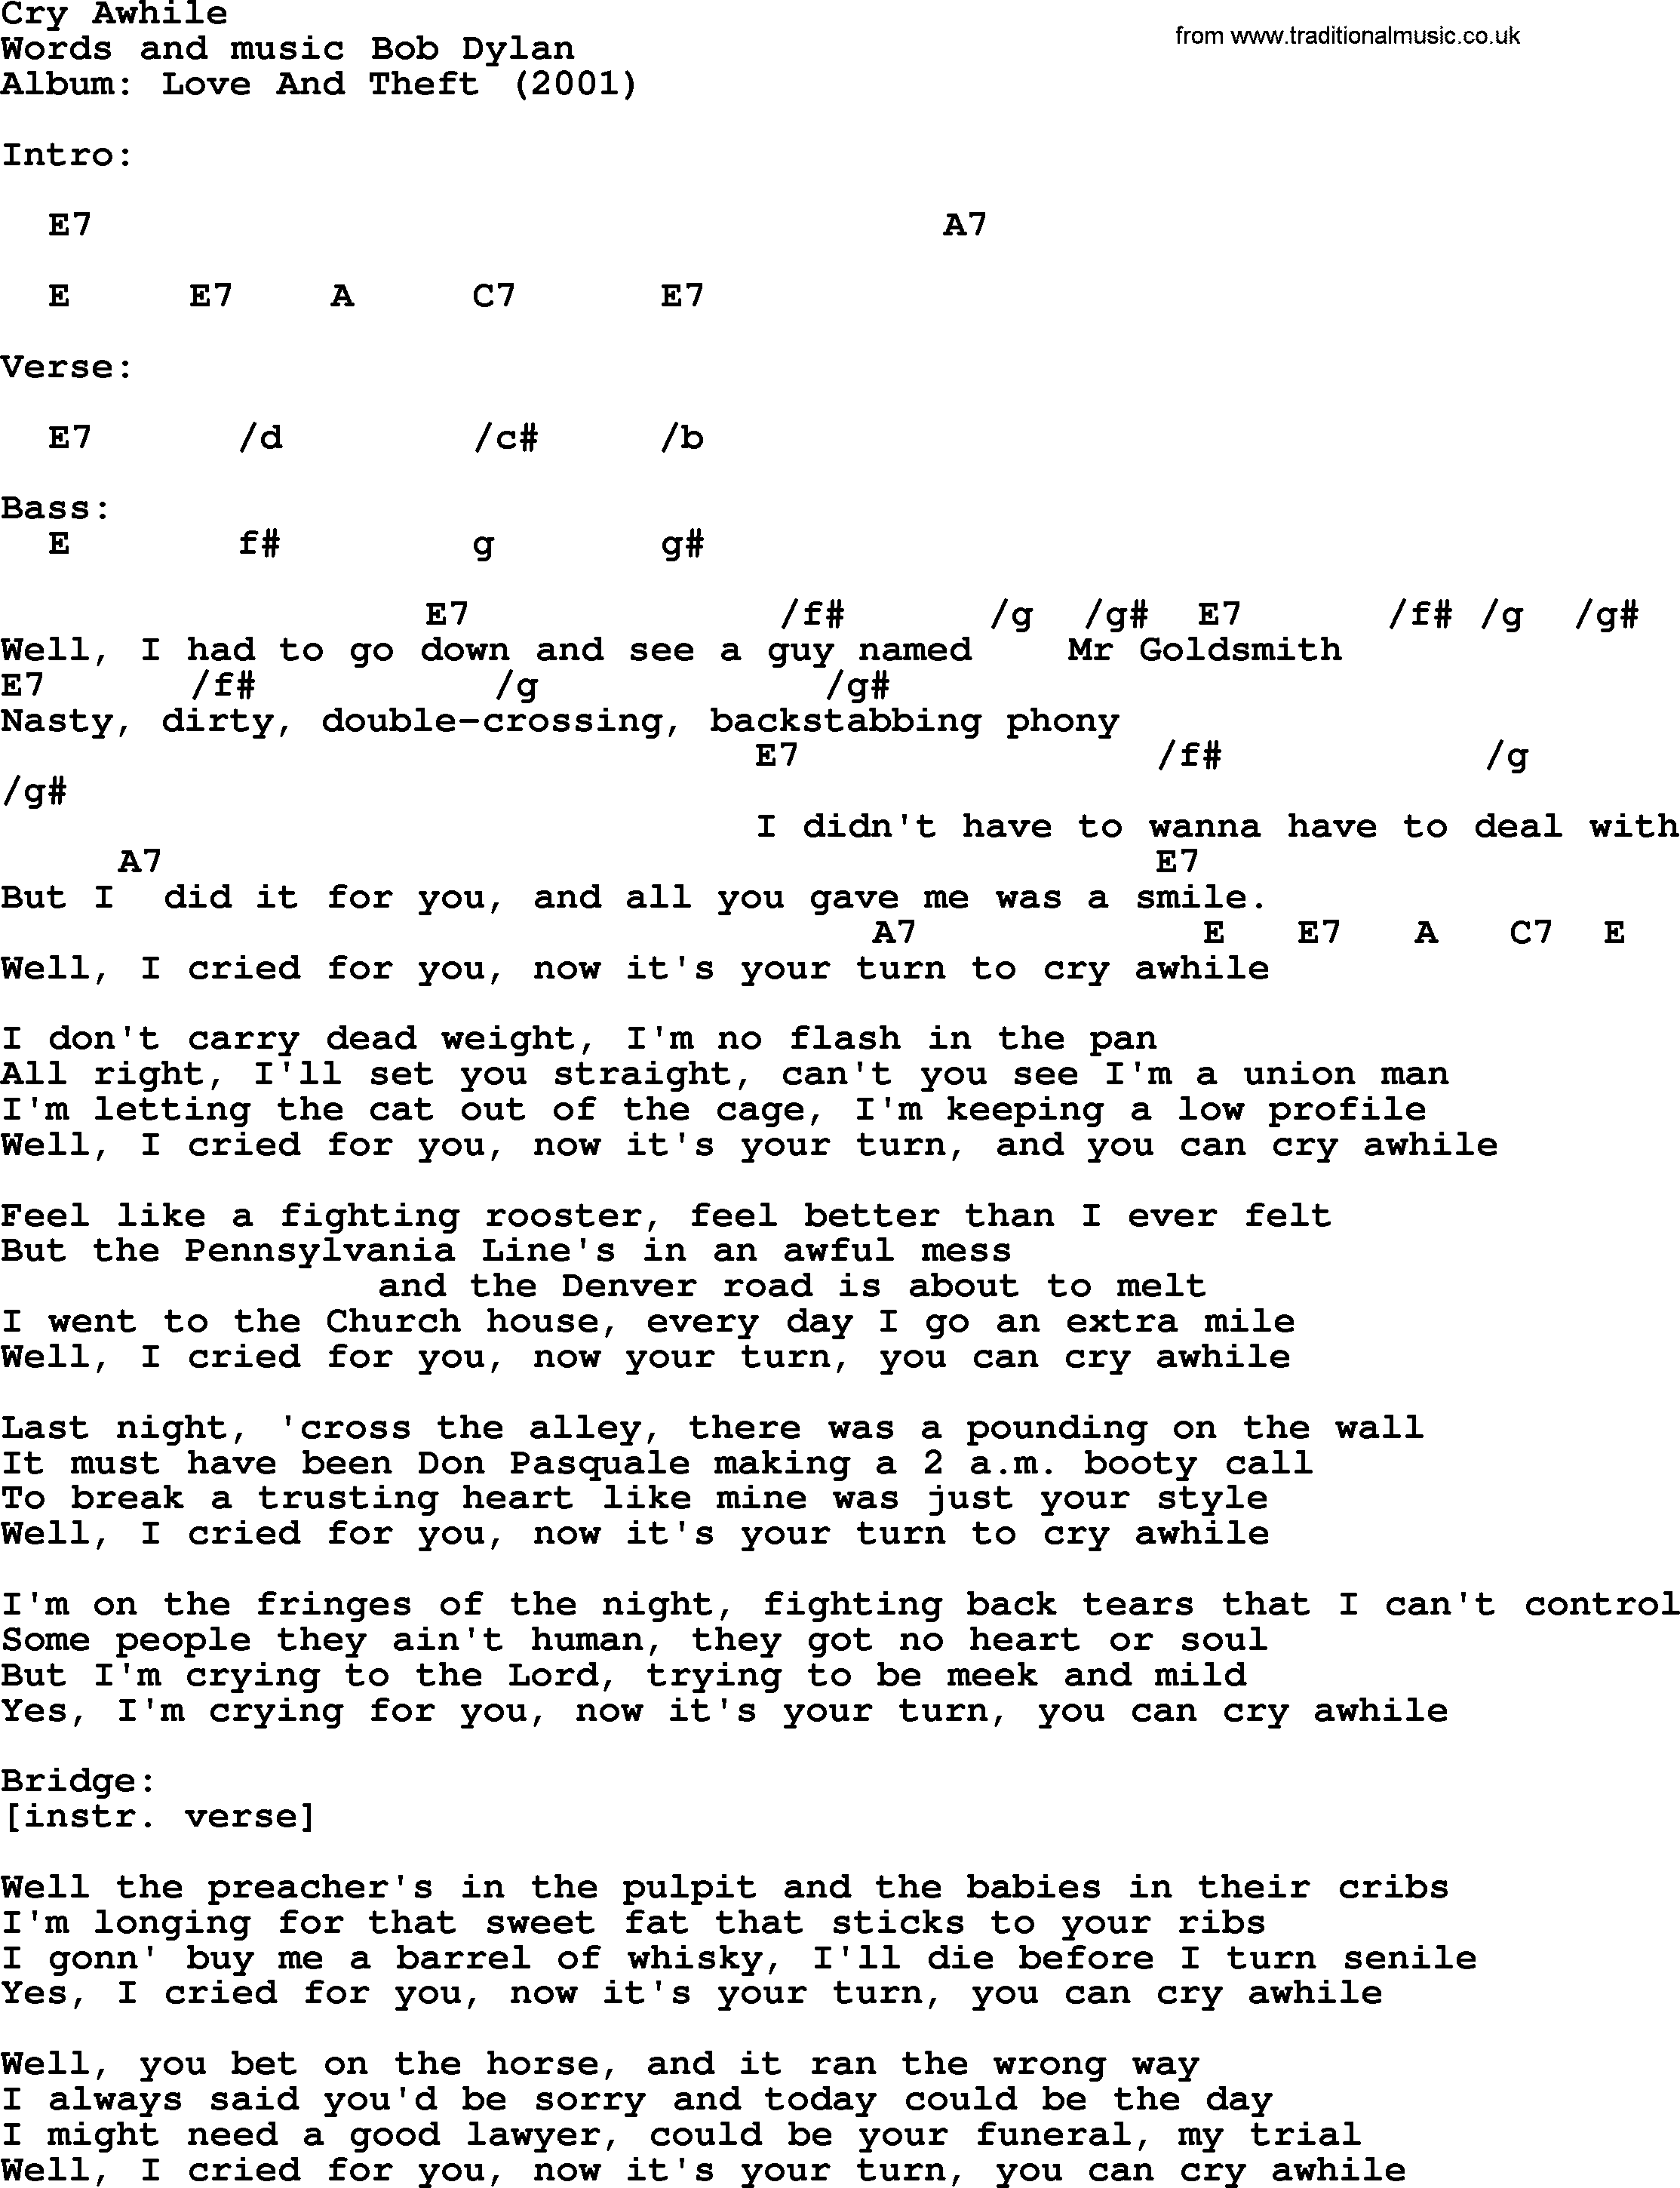 Bob Dylan song, lyrics with chords - Cry Awhile